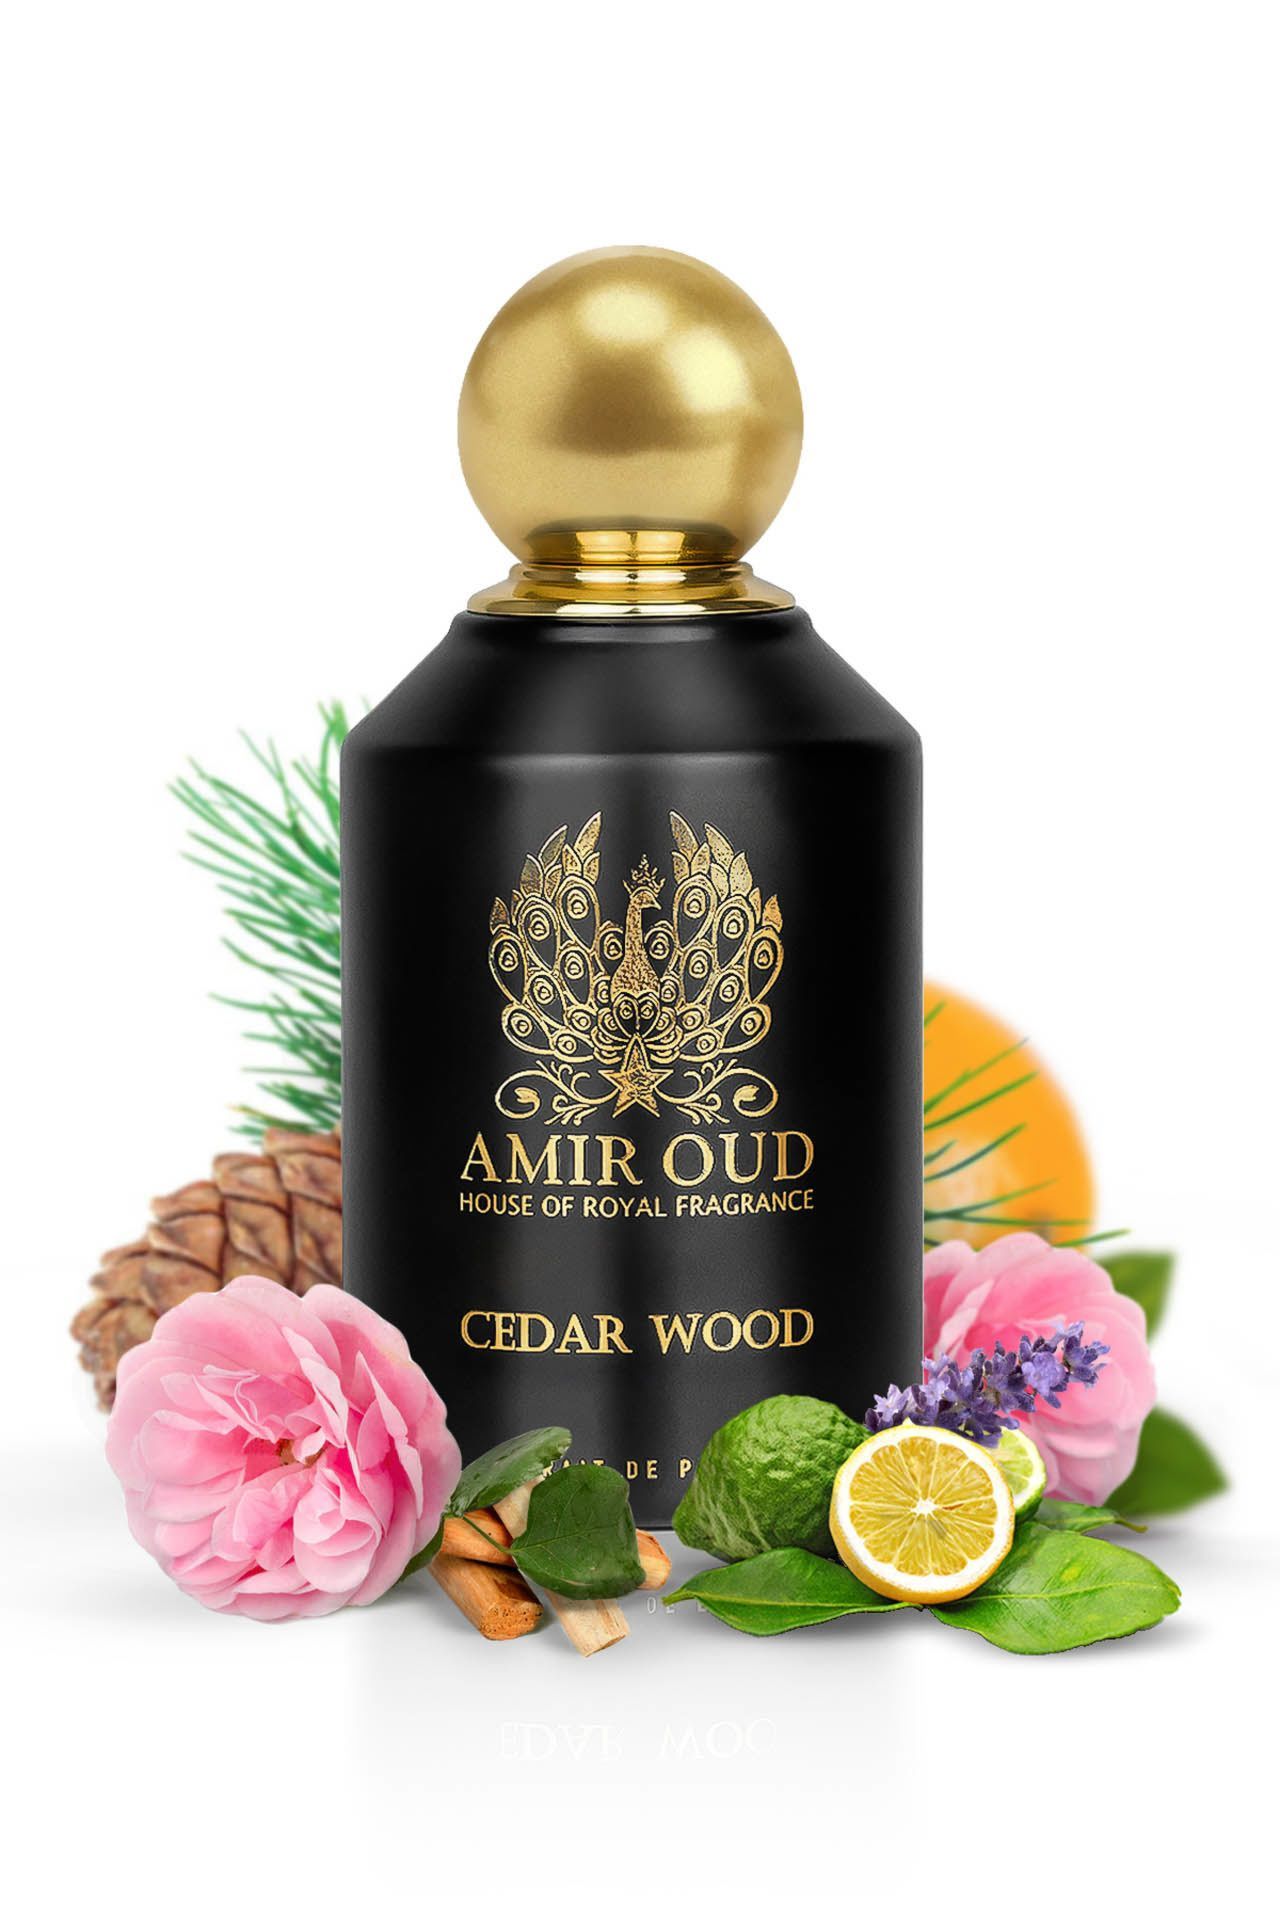 Discover the Alluring Scents of Perfumes With Cedar Notes